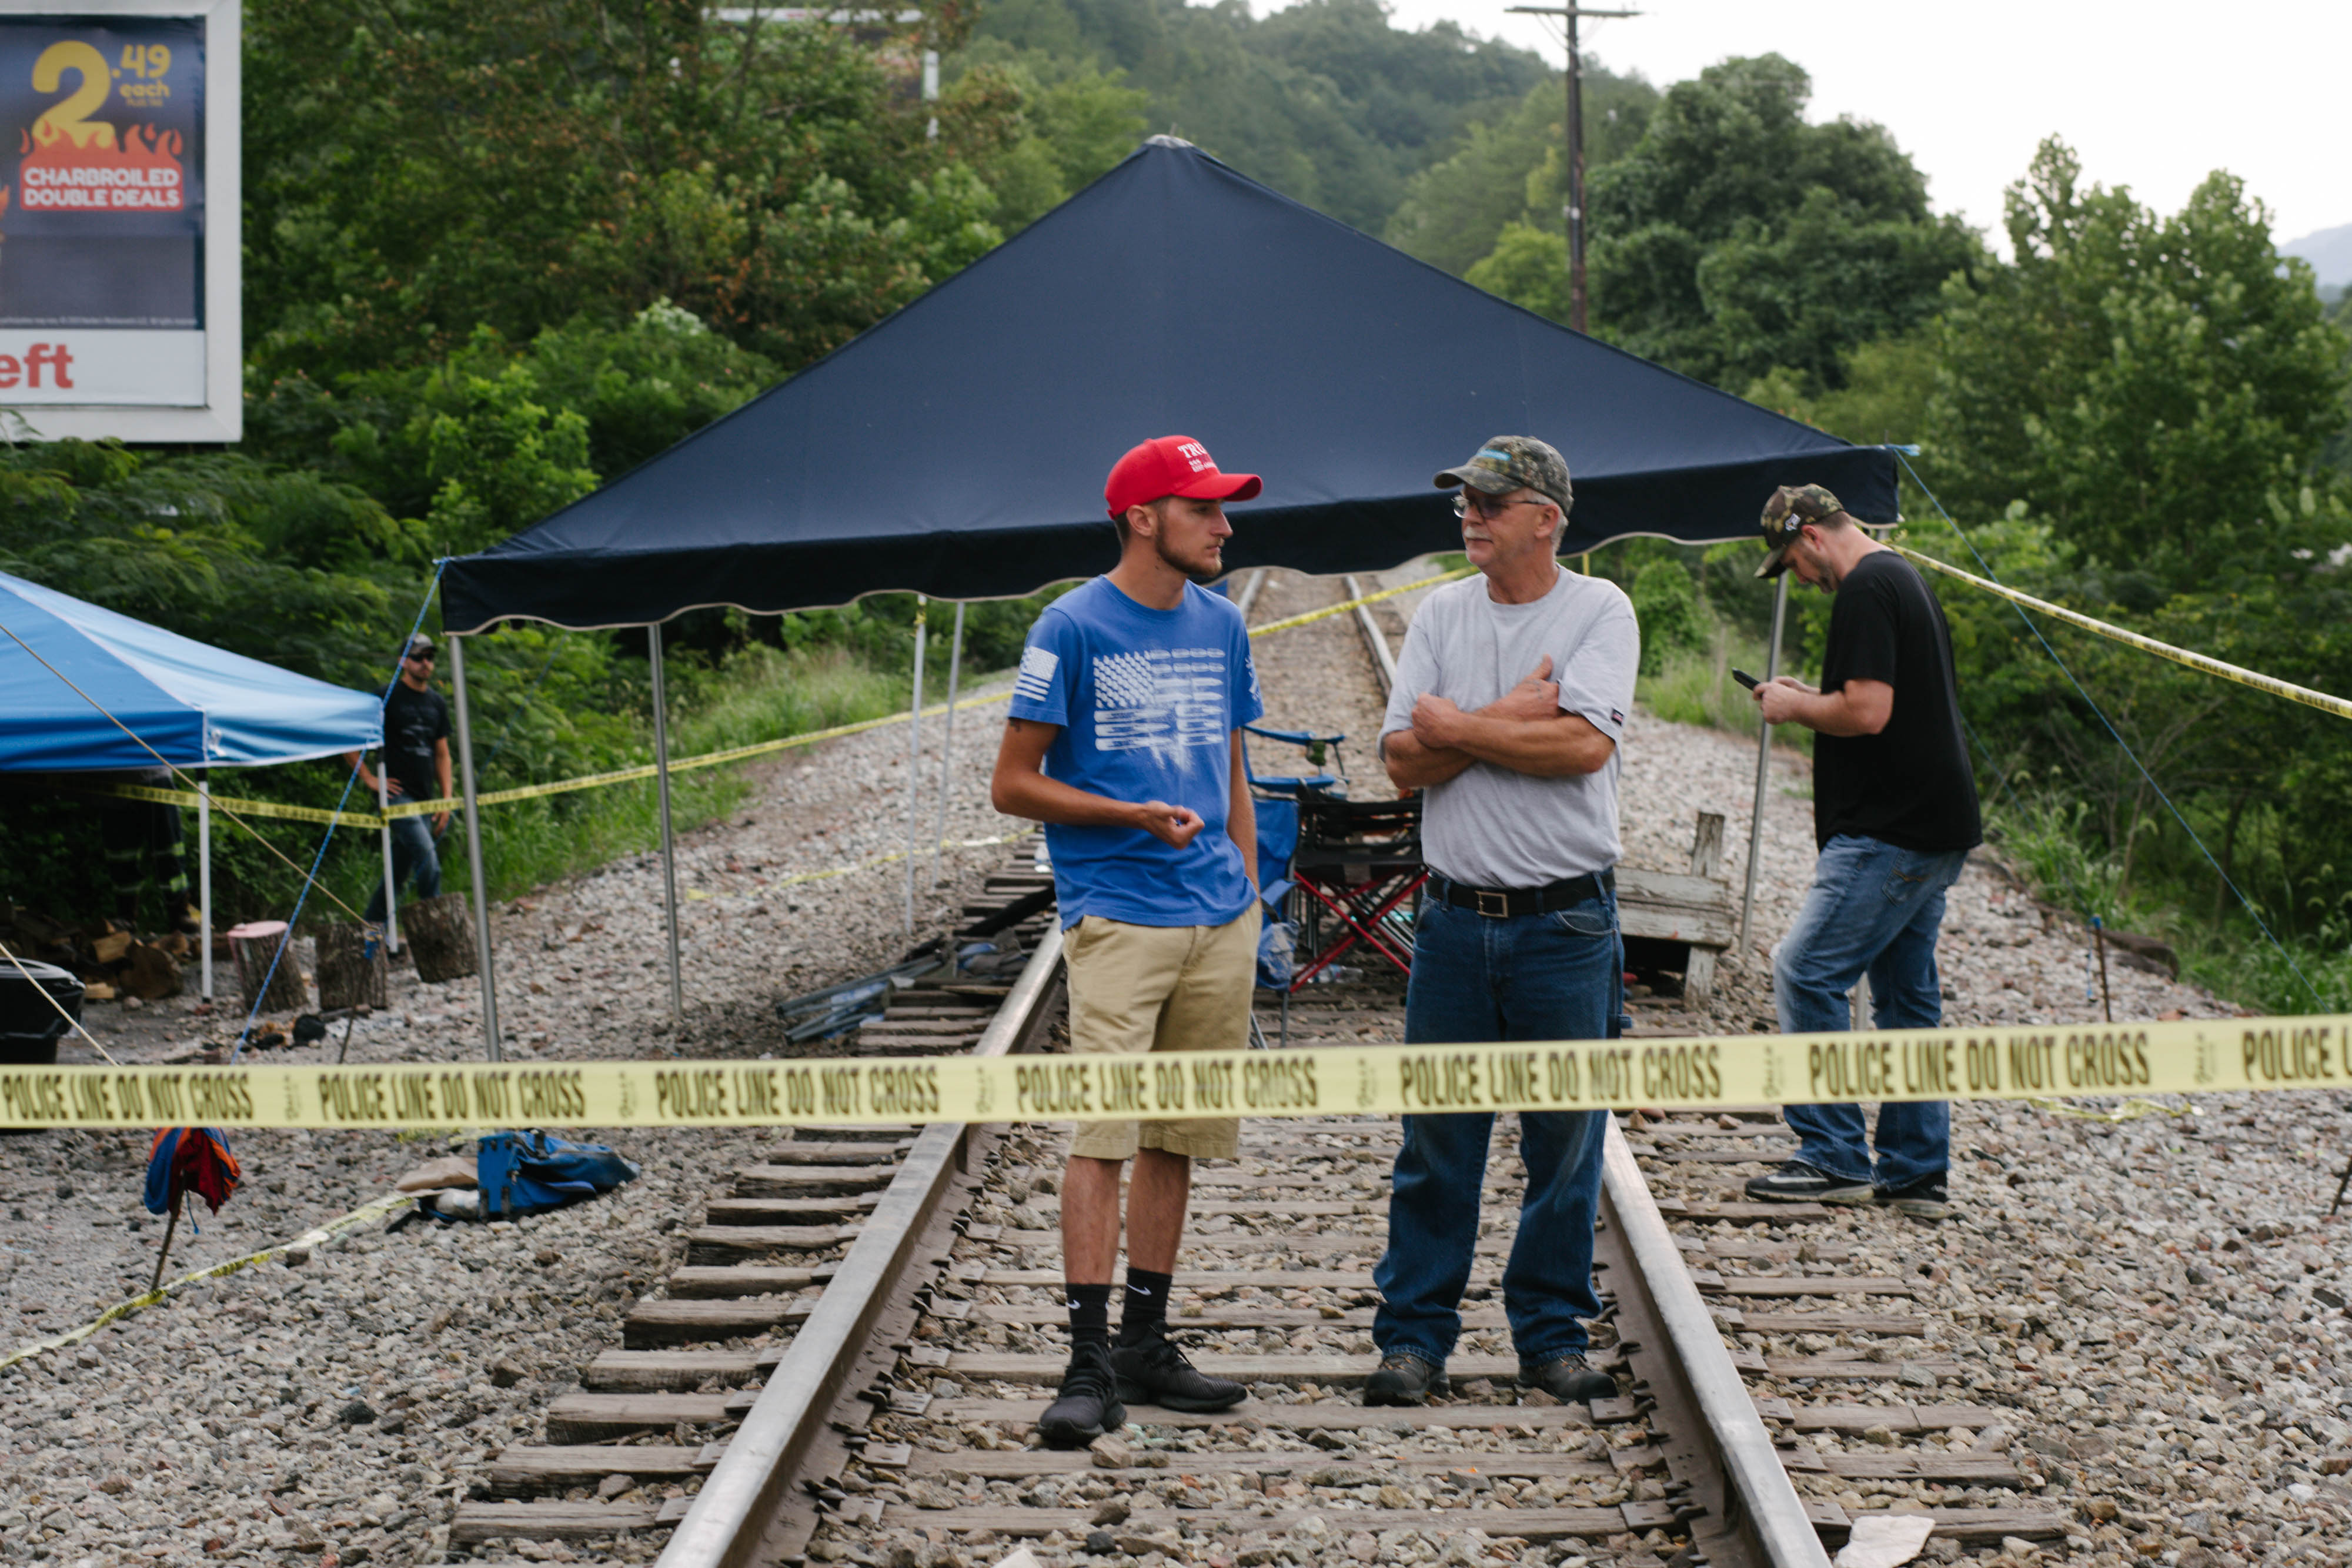 Miners stand on train tracks in Cumberland, Kentucky, U.S., on Friday, Aug. 2, 2019. The miners have been working in shifts to block railroad tracks leading to a Blackjewel mine outside since Monday afternoon, Harlan County Judge-Executive Dan Mosley said in an interview. They're demanding back pay for work done in weeks leading up to the bankruptcy, after checks issued by Blackjewel bounced or never arrived. Photographer: via Getty Images (Meg Roussos—Bloomberg/Getty Images)